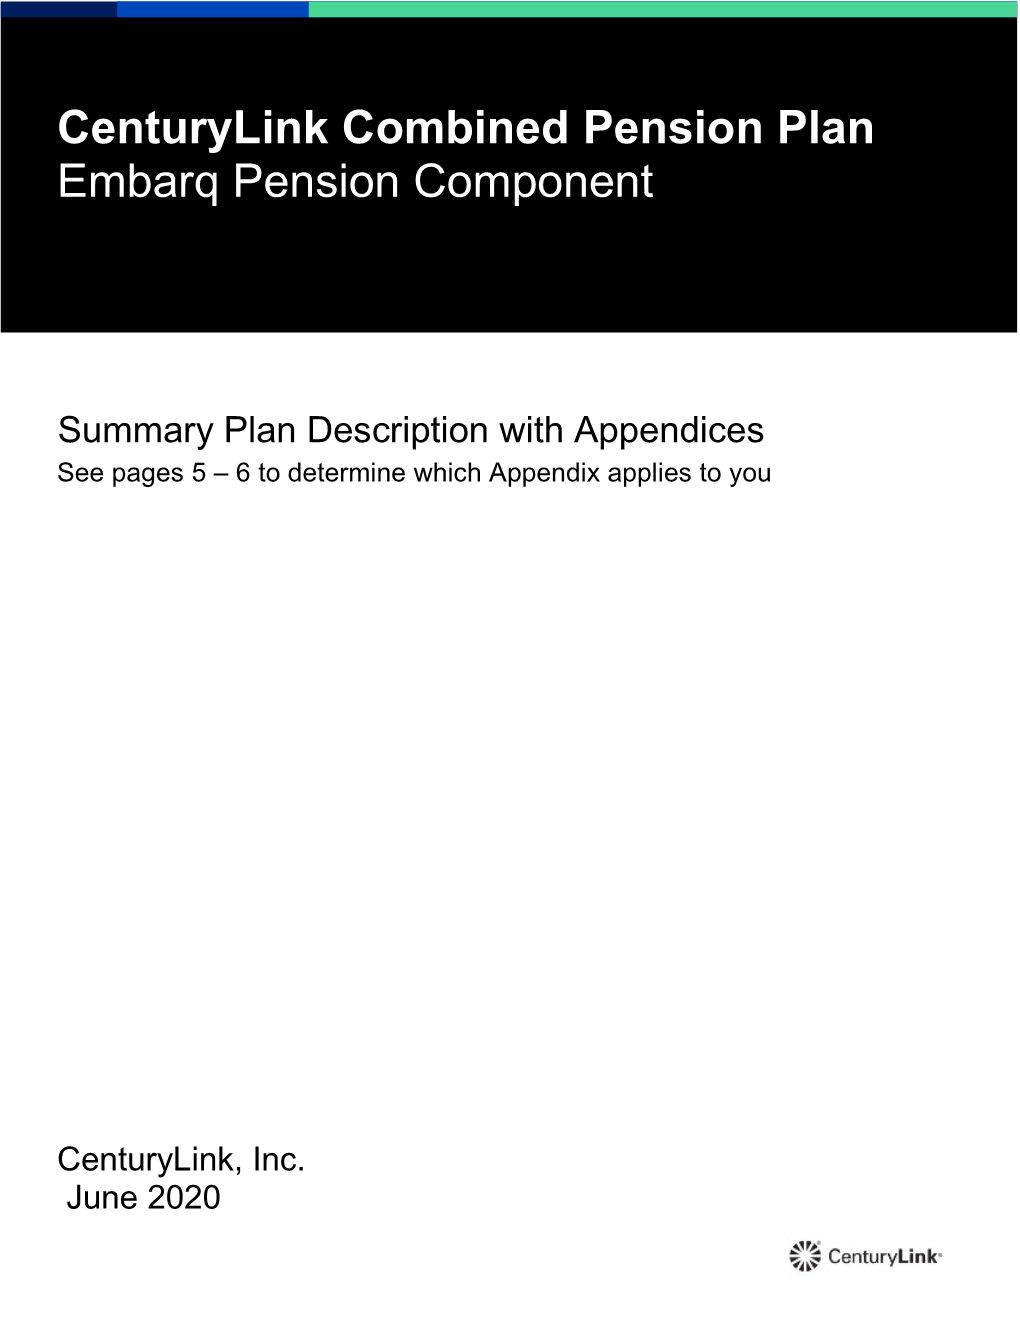 Centurylink Combined Pension Plan Embarq Pension Component